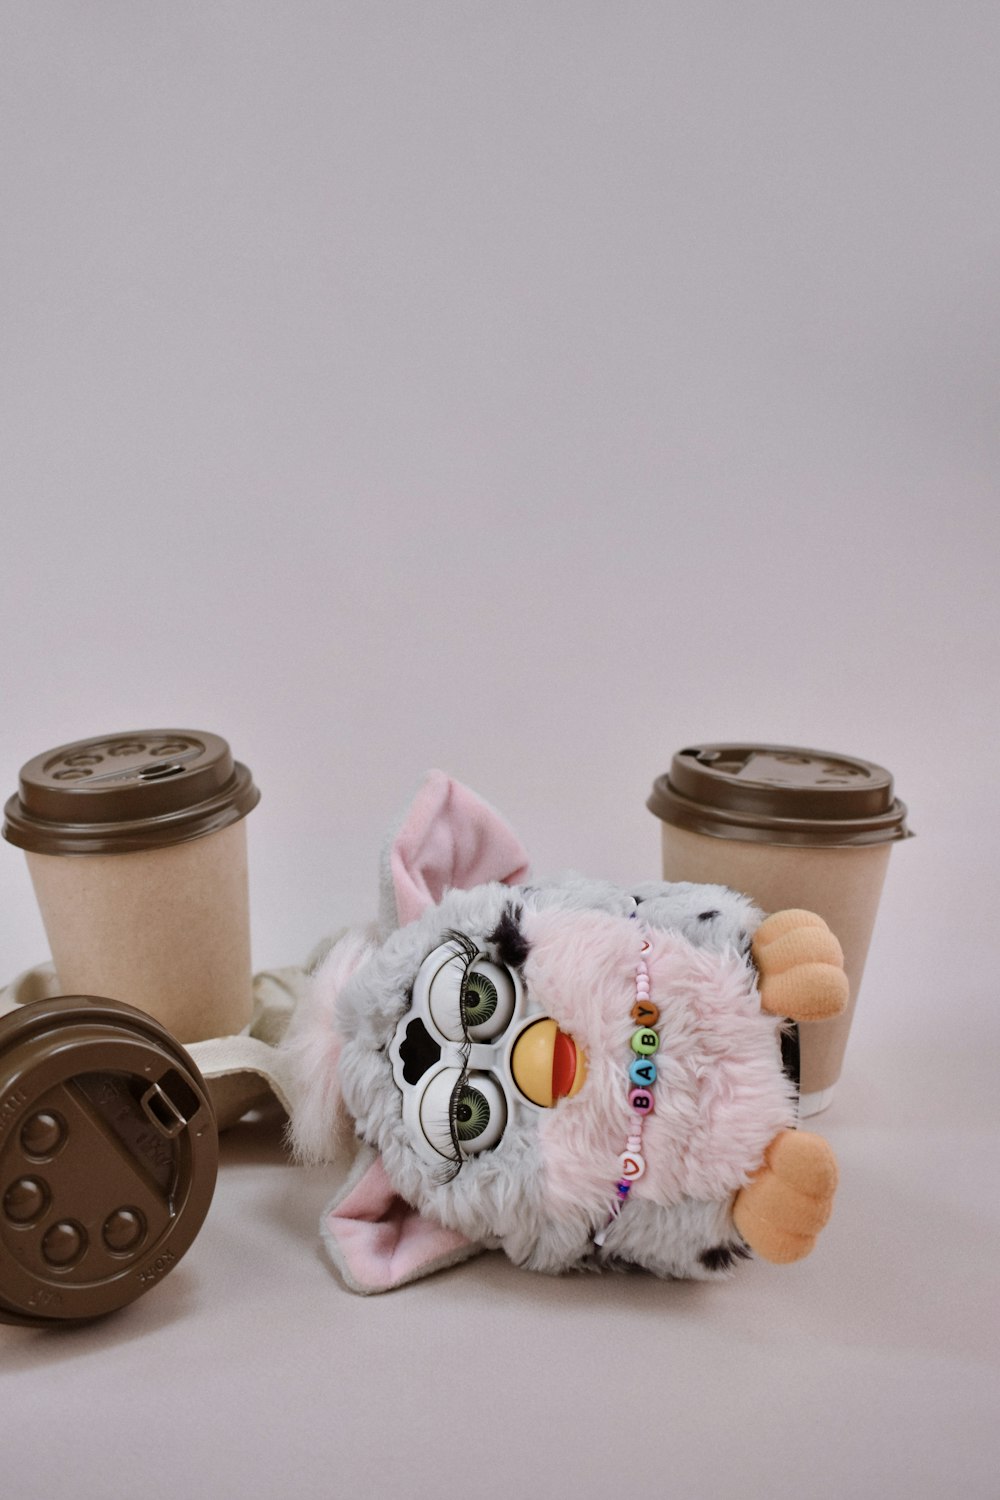 a stuffed animal next to a cup of coffee